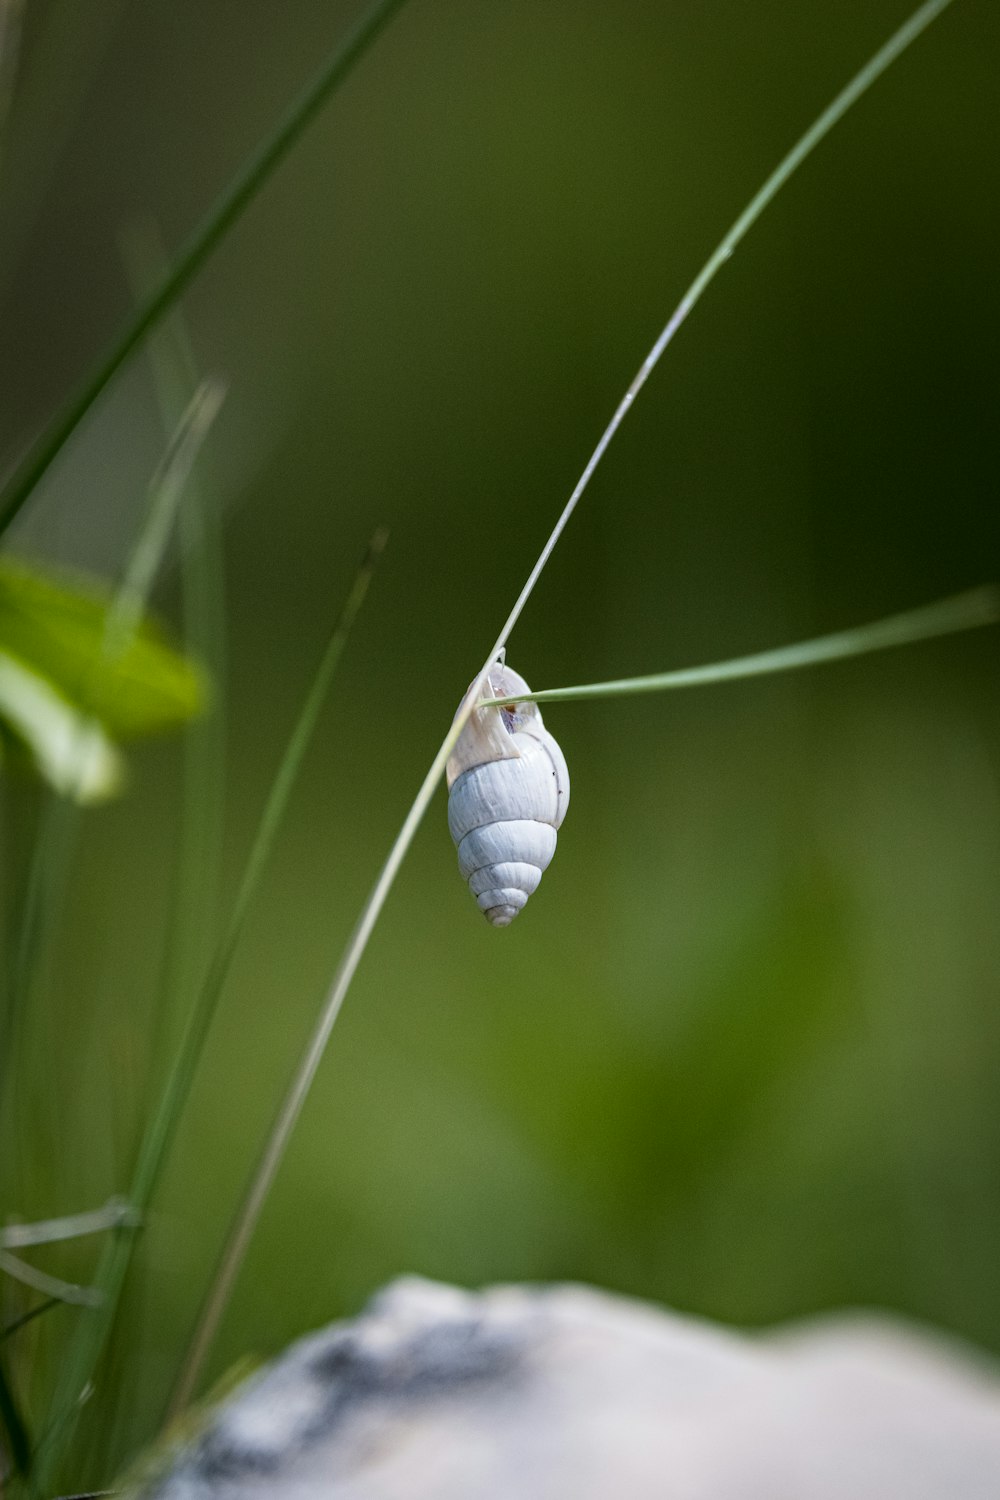 white and black snail on green grass during daytime